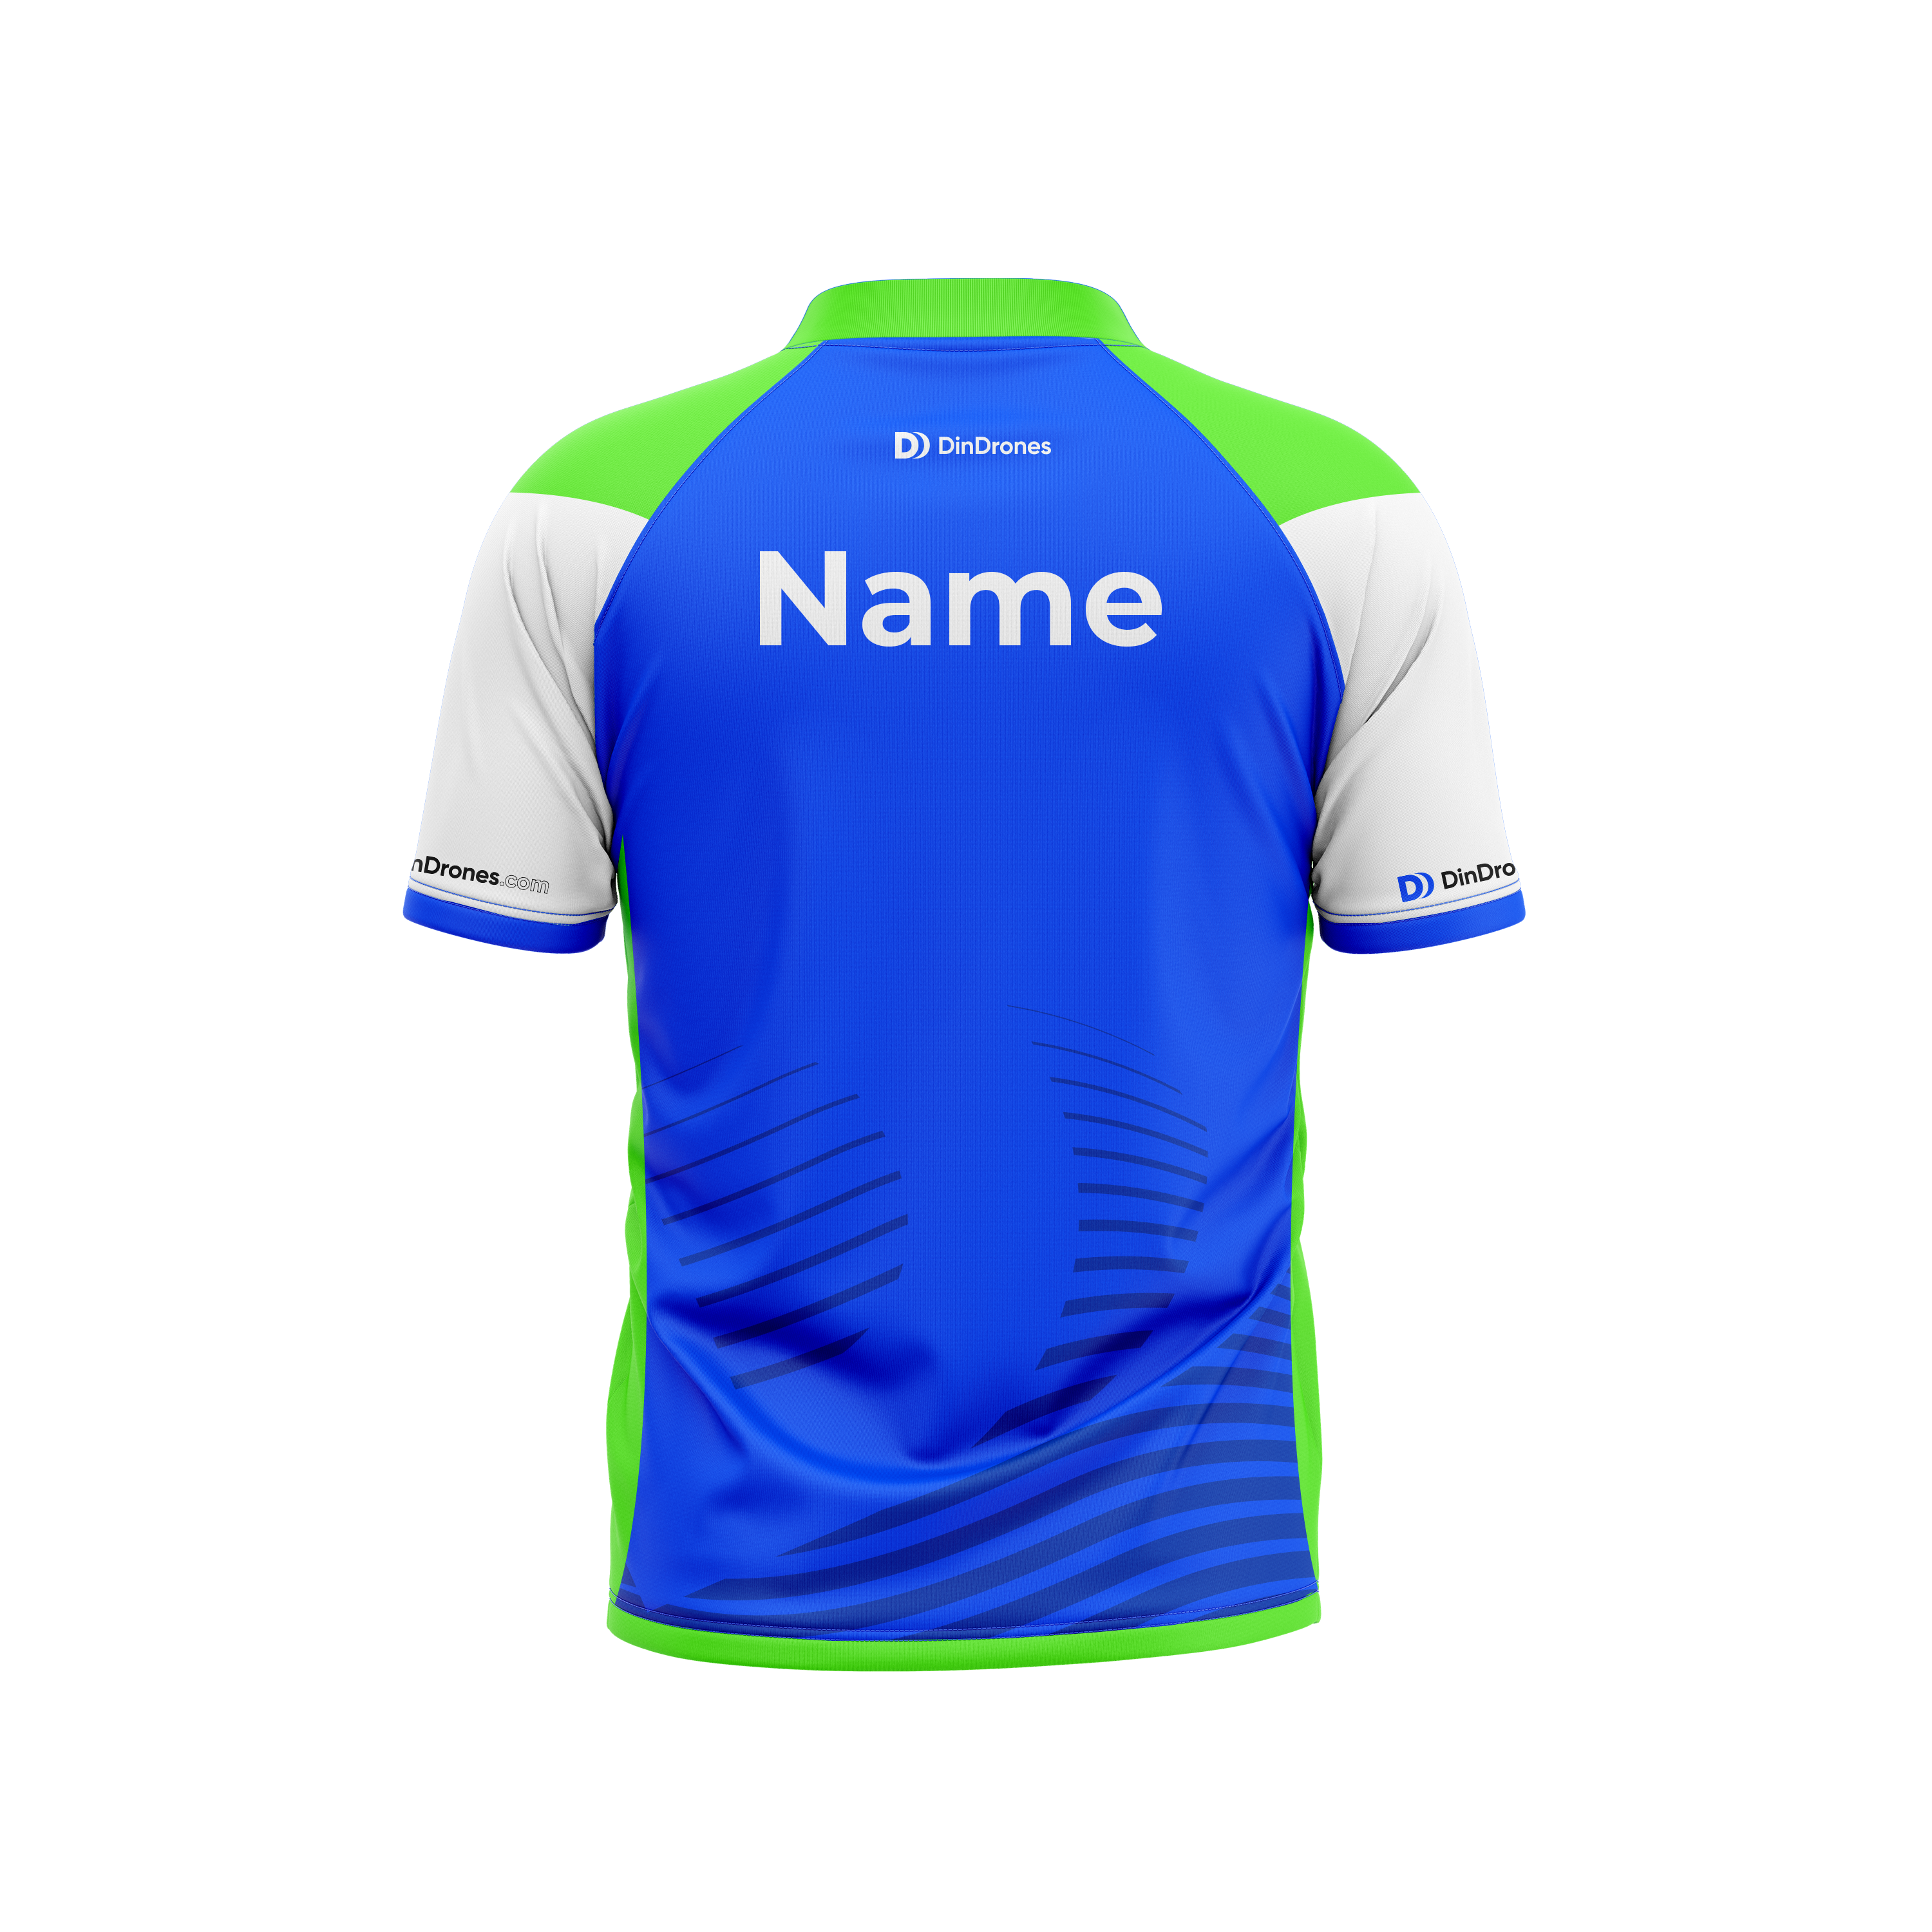 DinDrones | Immortal Series | Jersey